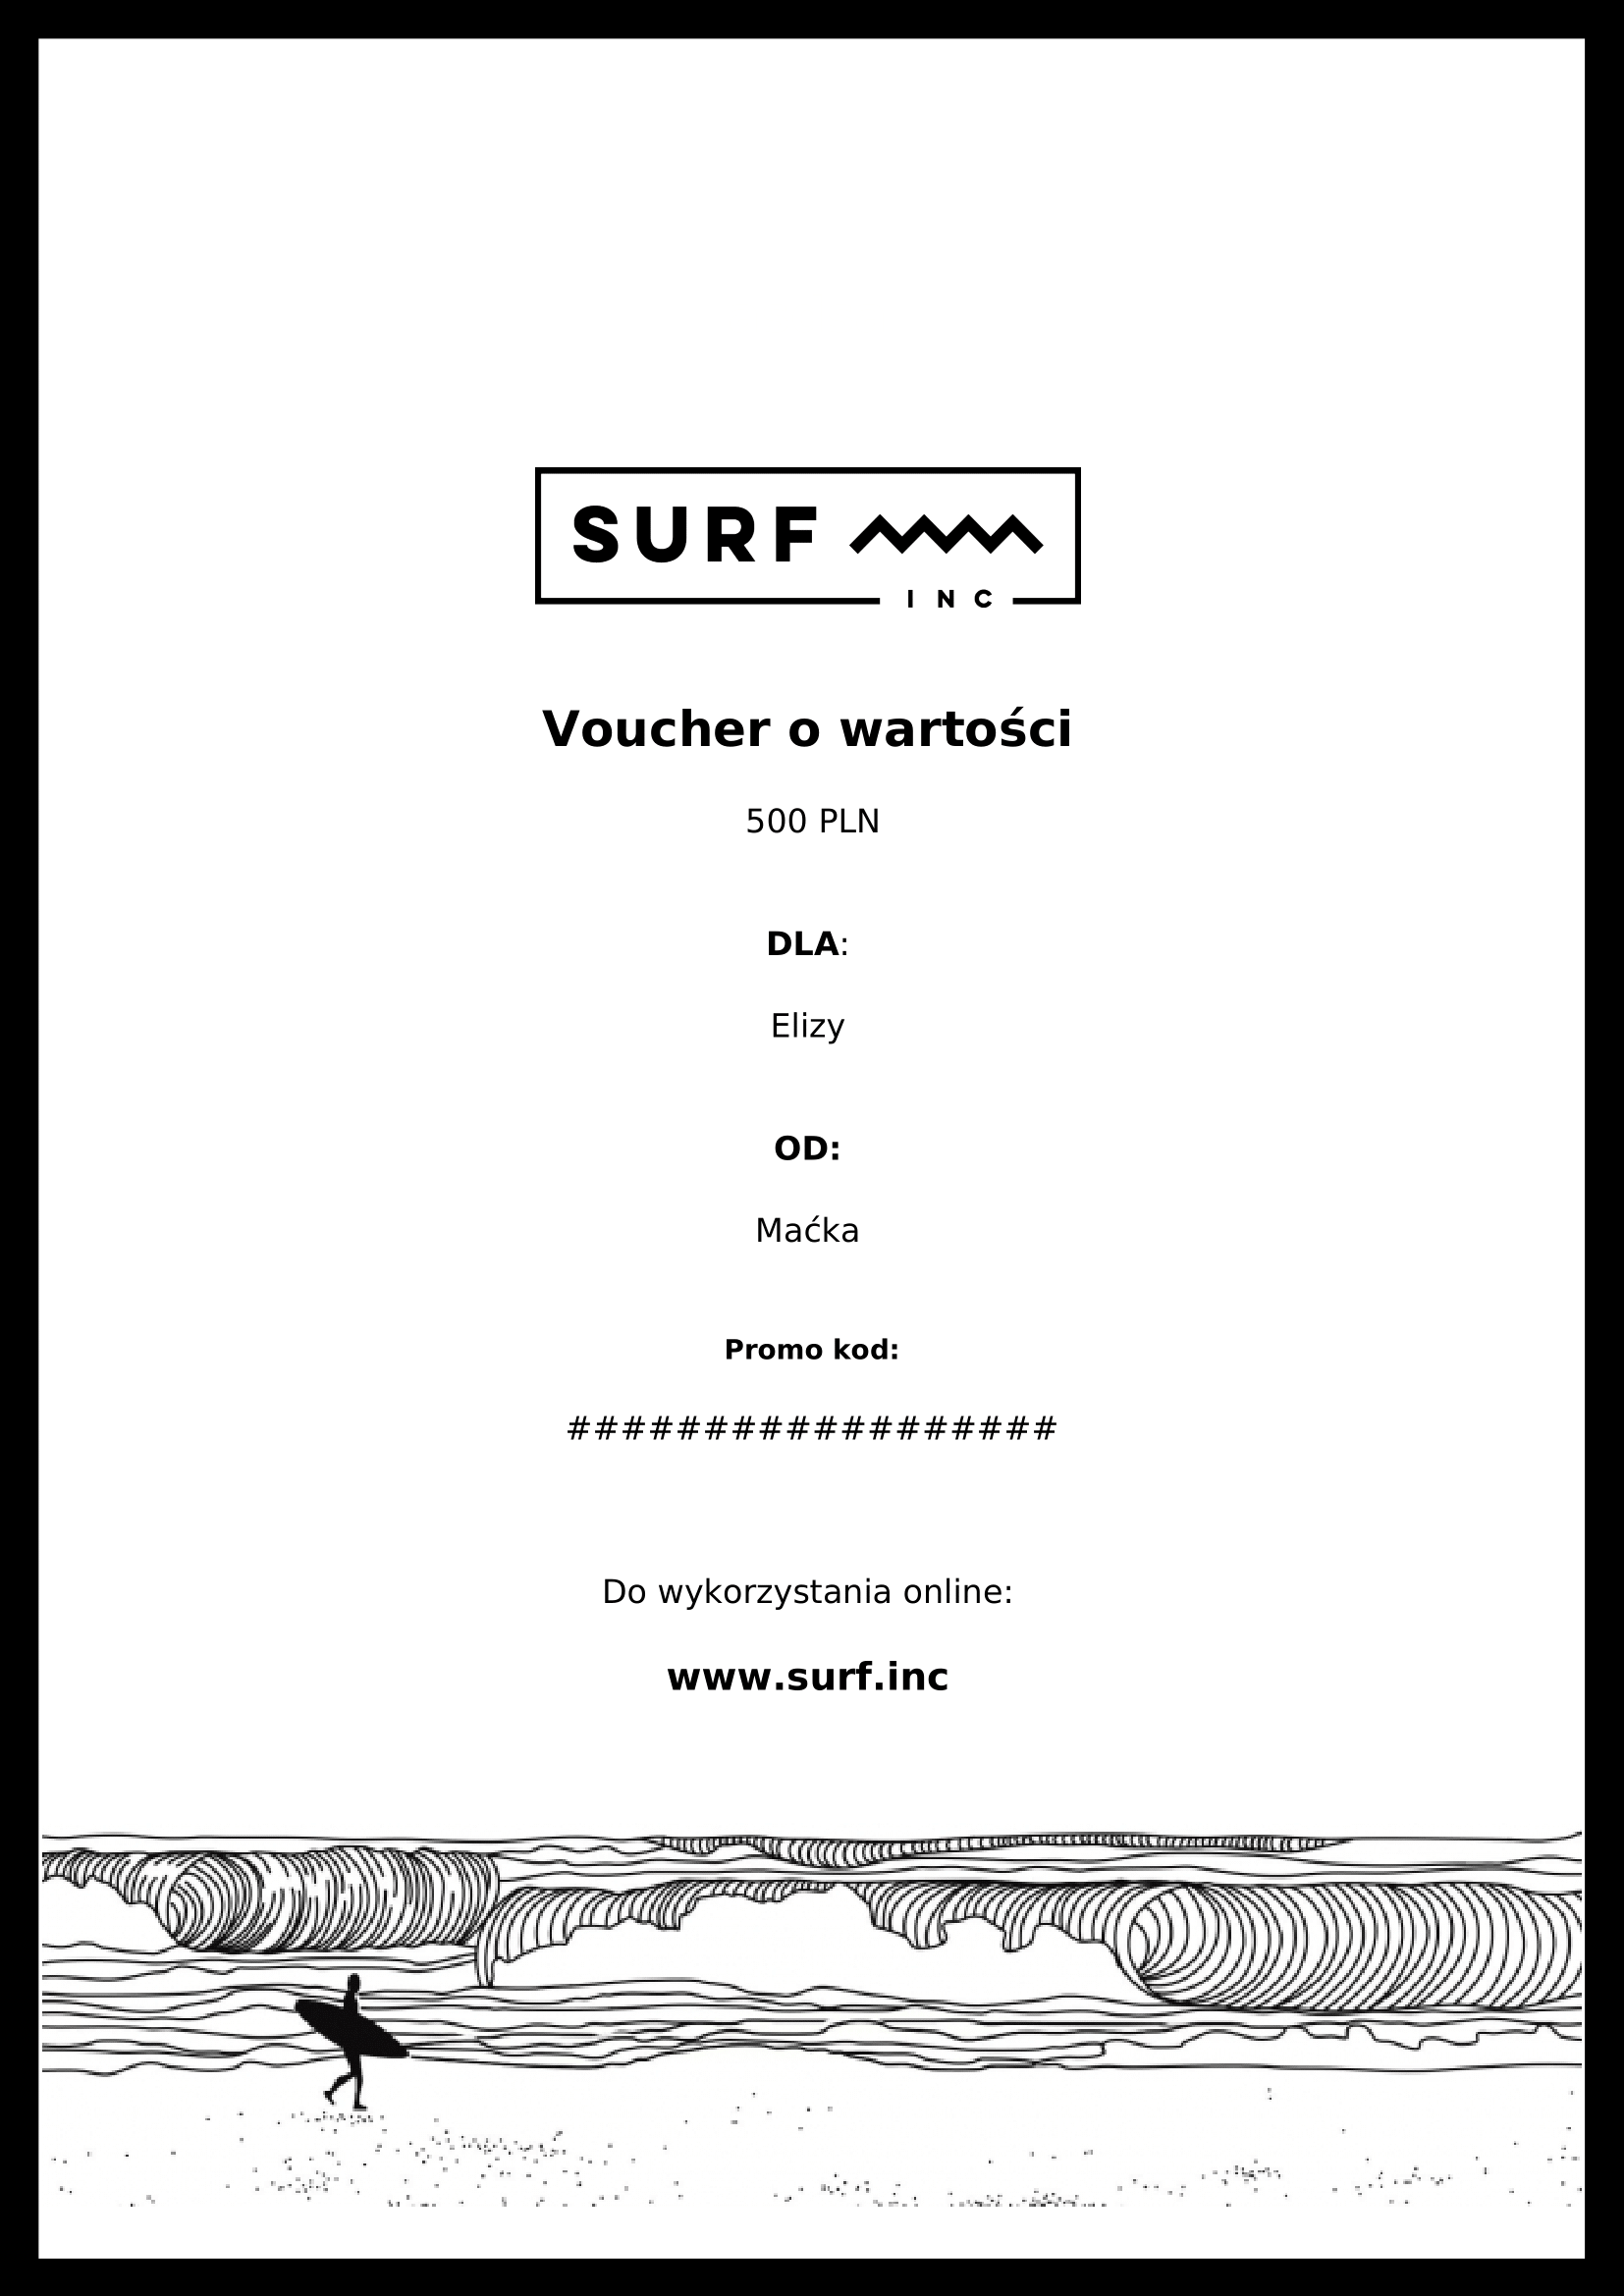 giftcard with surfer